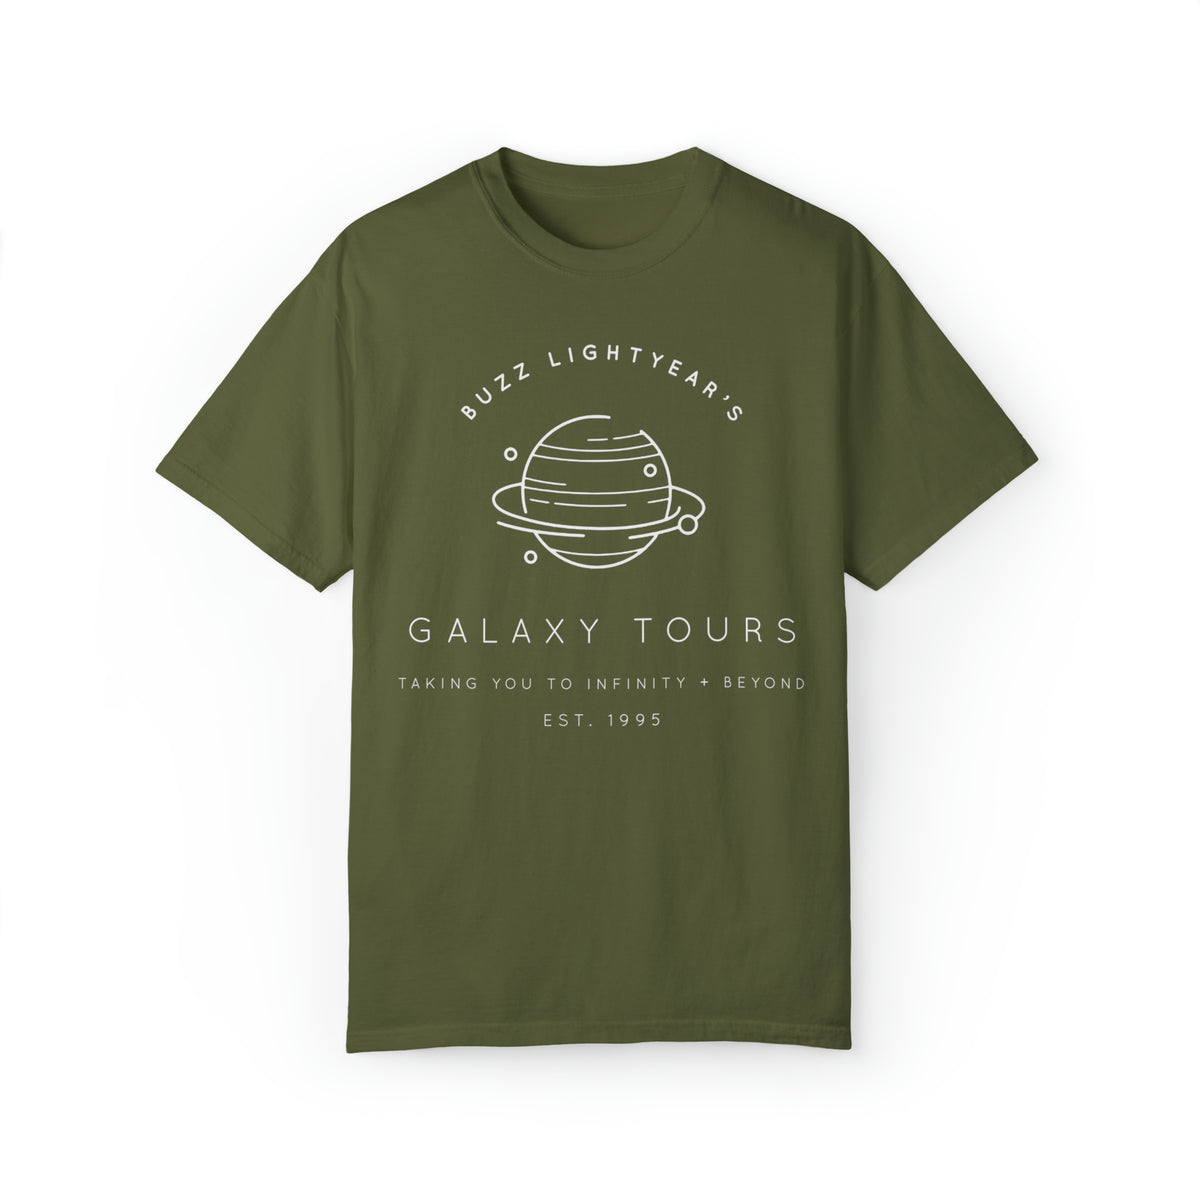 Lightyear's Galaxy Tours Comfort Colors Unisex Garment-Dyed T-shirt